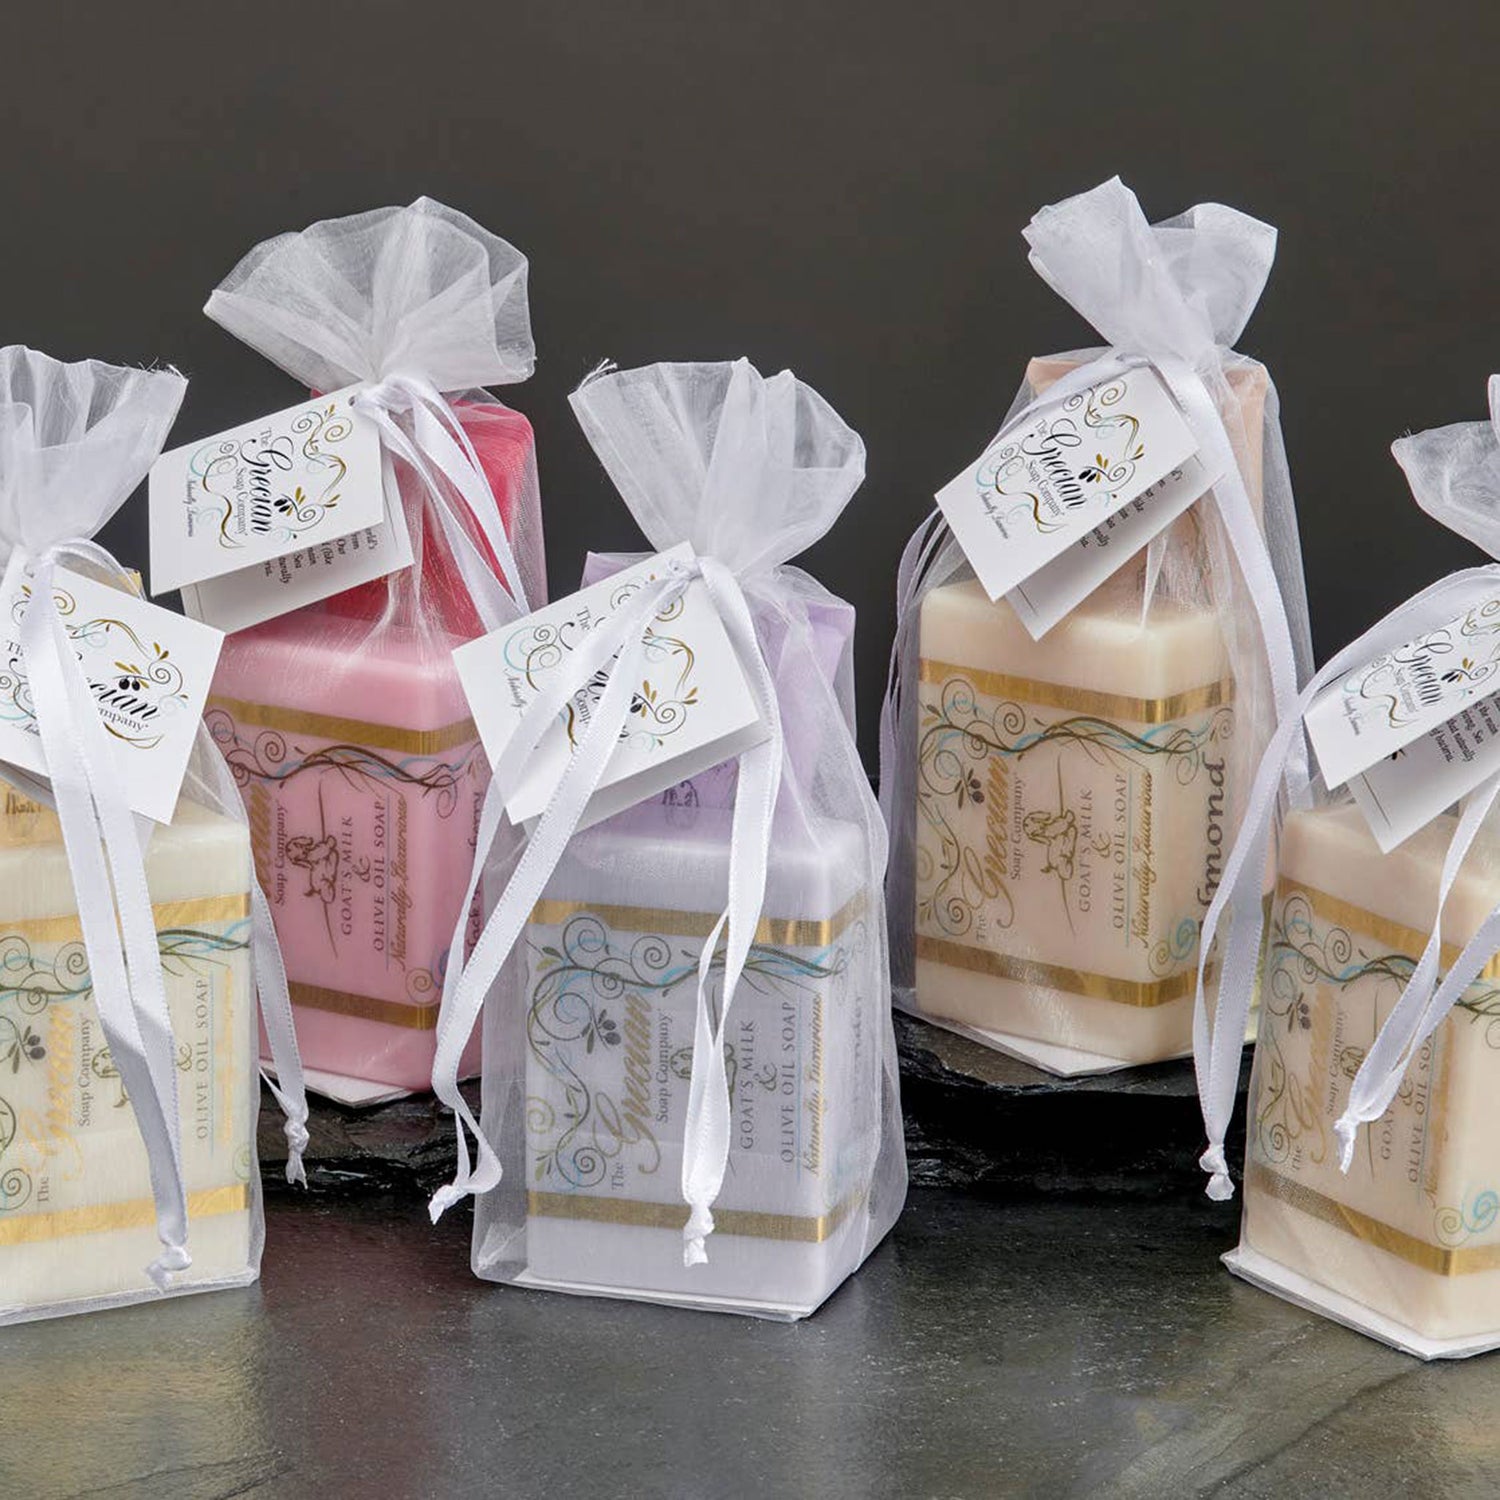 Yankee Candle Wedding Favours   –